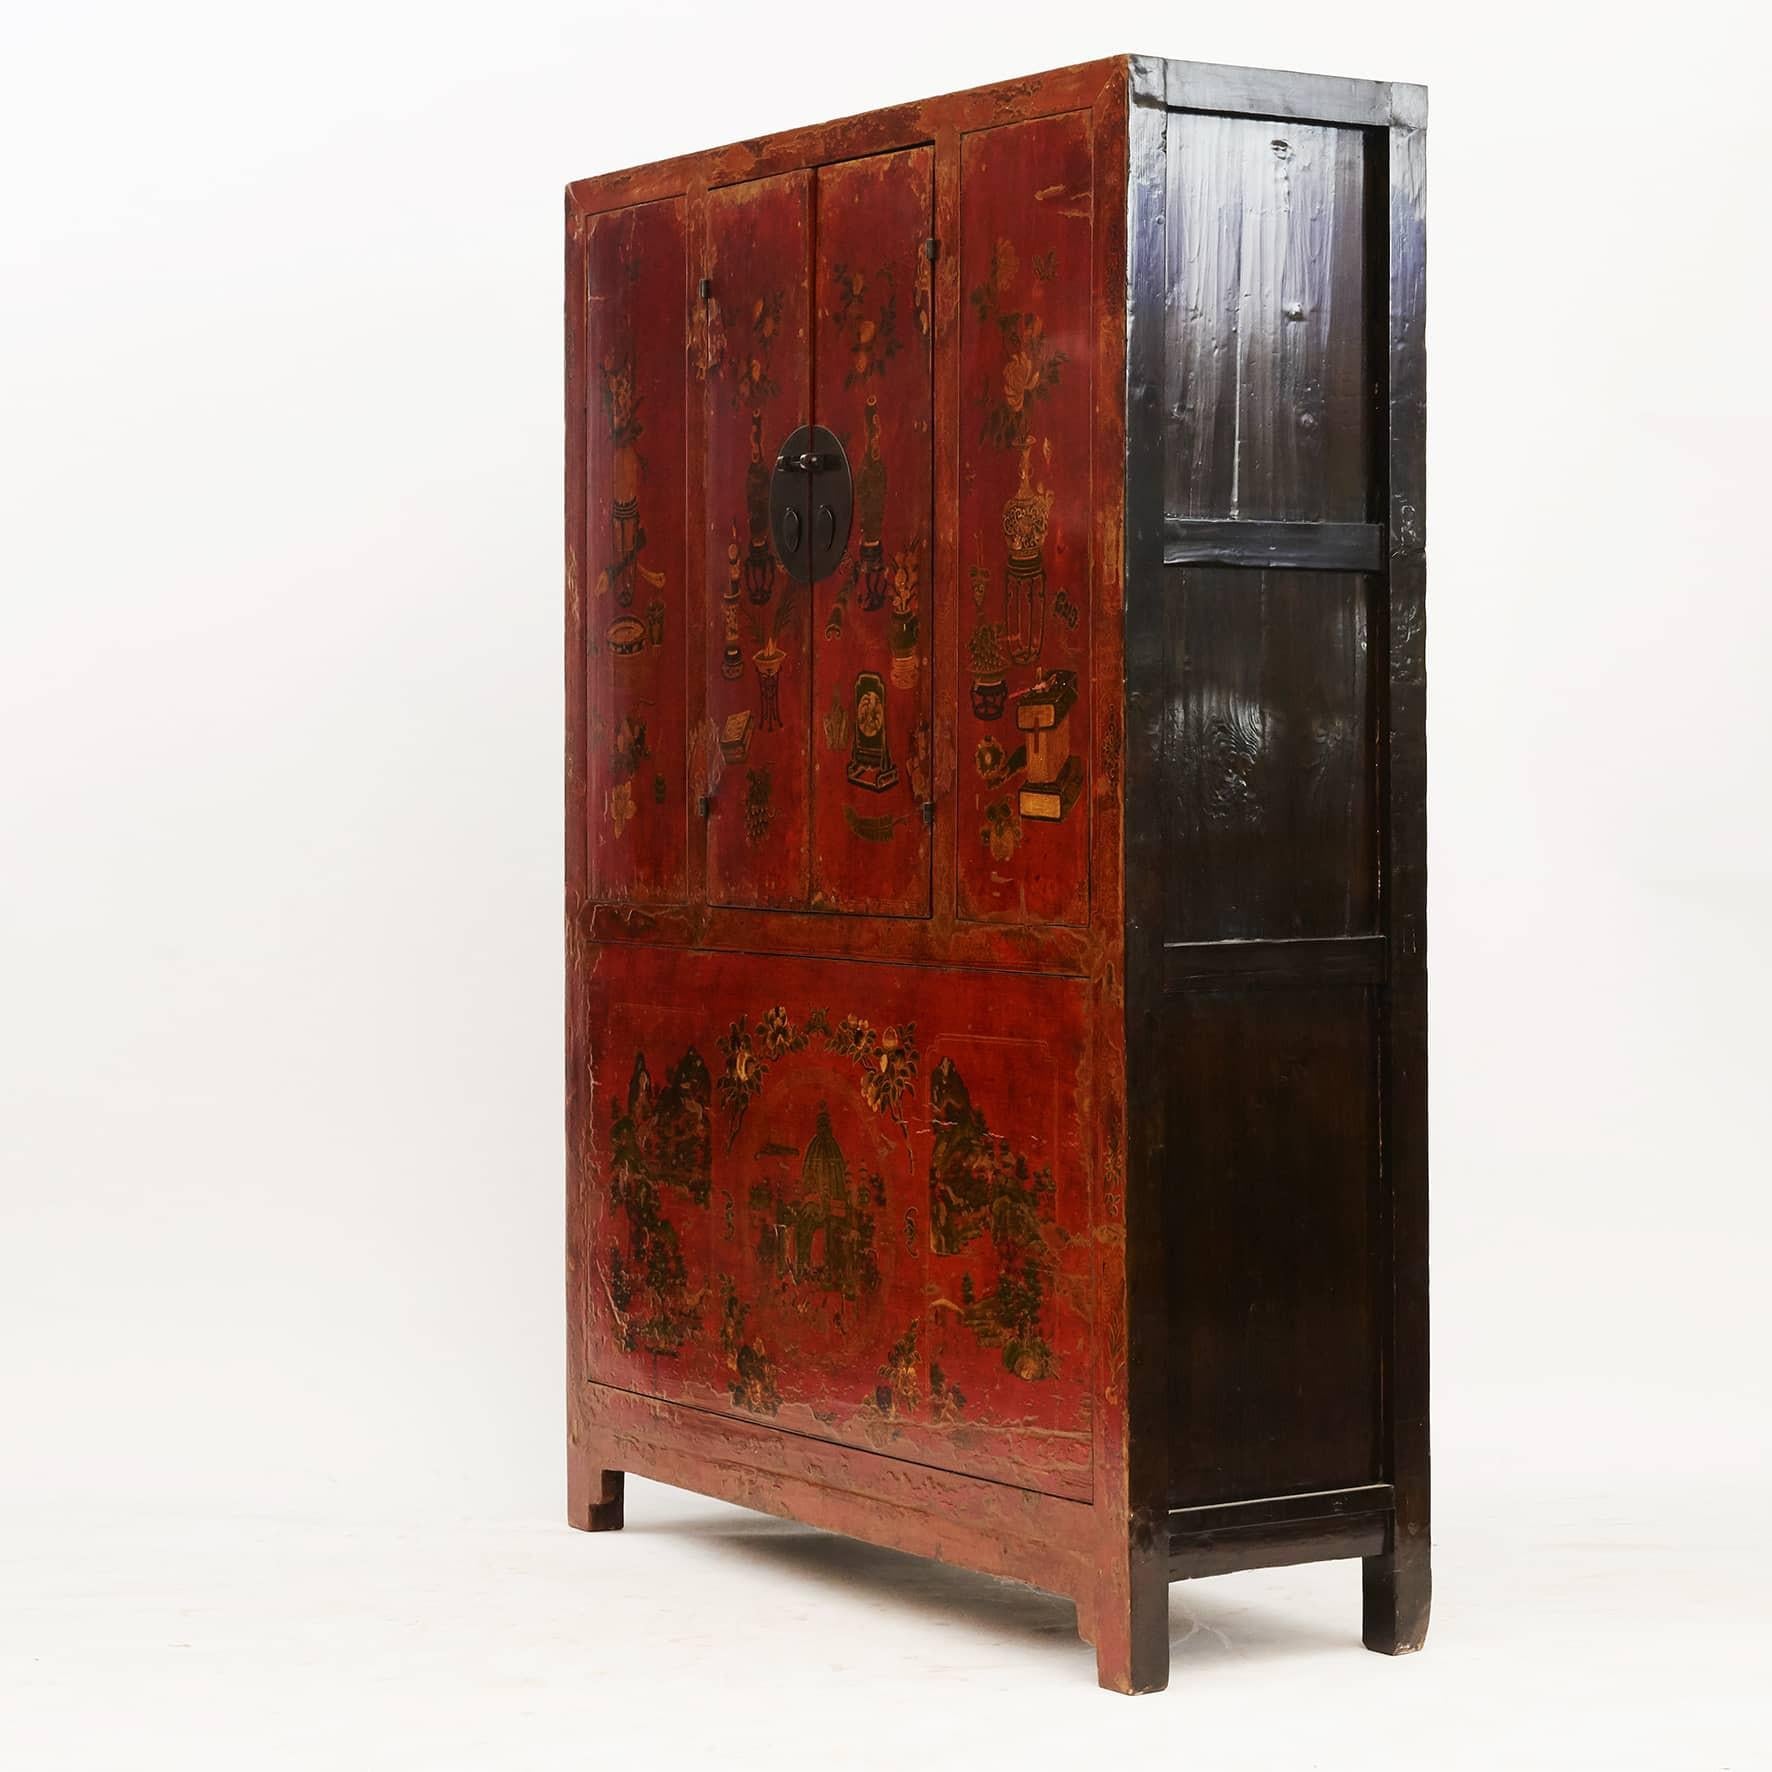 Rare Qing dynasty cabinet with original well preserved decorations.

Red base lacquer with polychrome decorations, black lacquer on the sides.
Top section with pair of panel doors lavishly decorated with charming decorative motifs, including flower